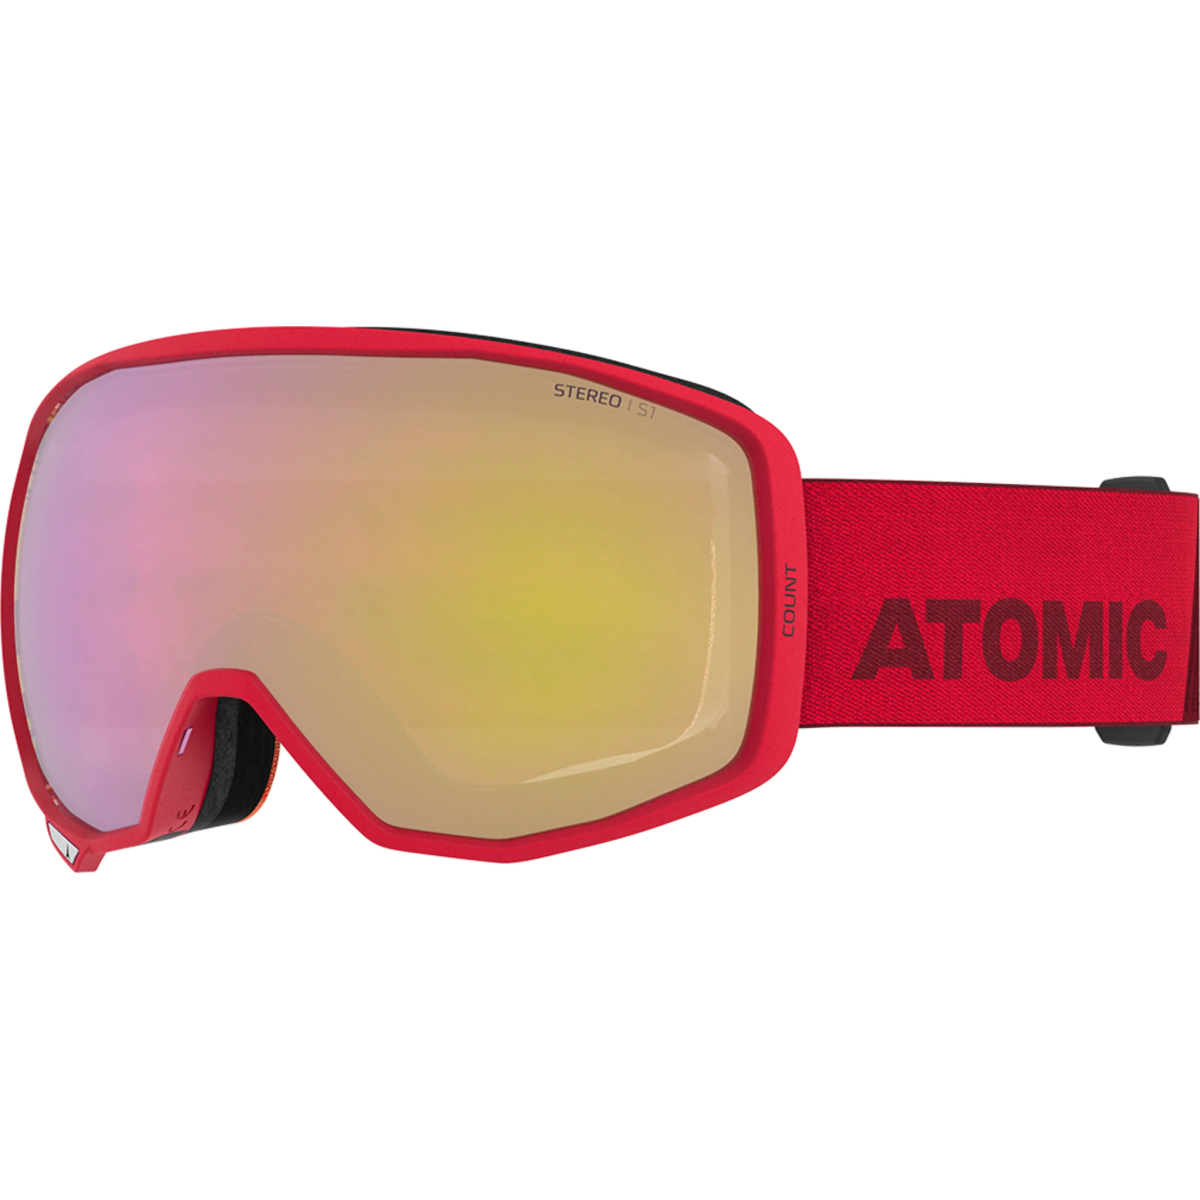 ATOMIC ATOMIC COUNT STEREO RED W/PINK YELLOW ST C1 goggles